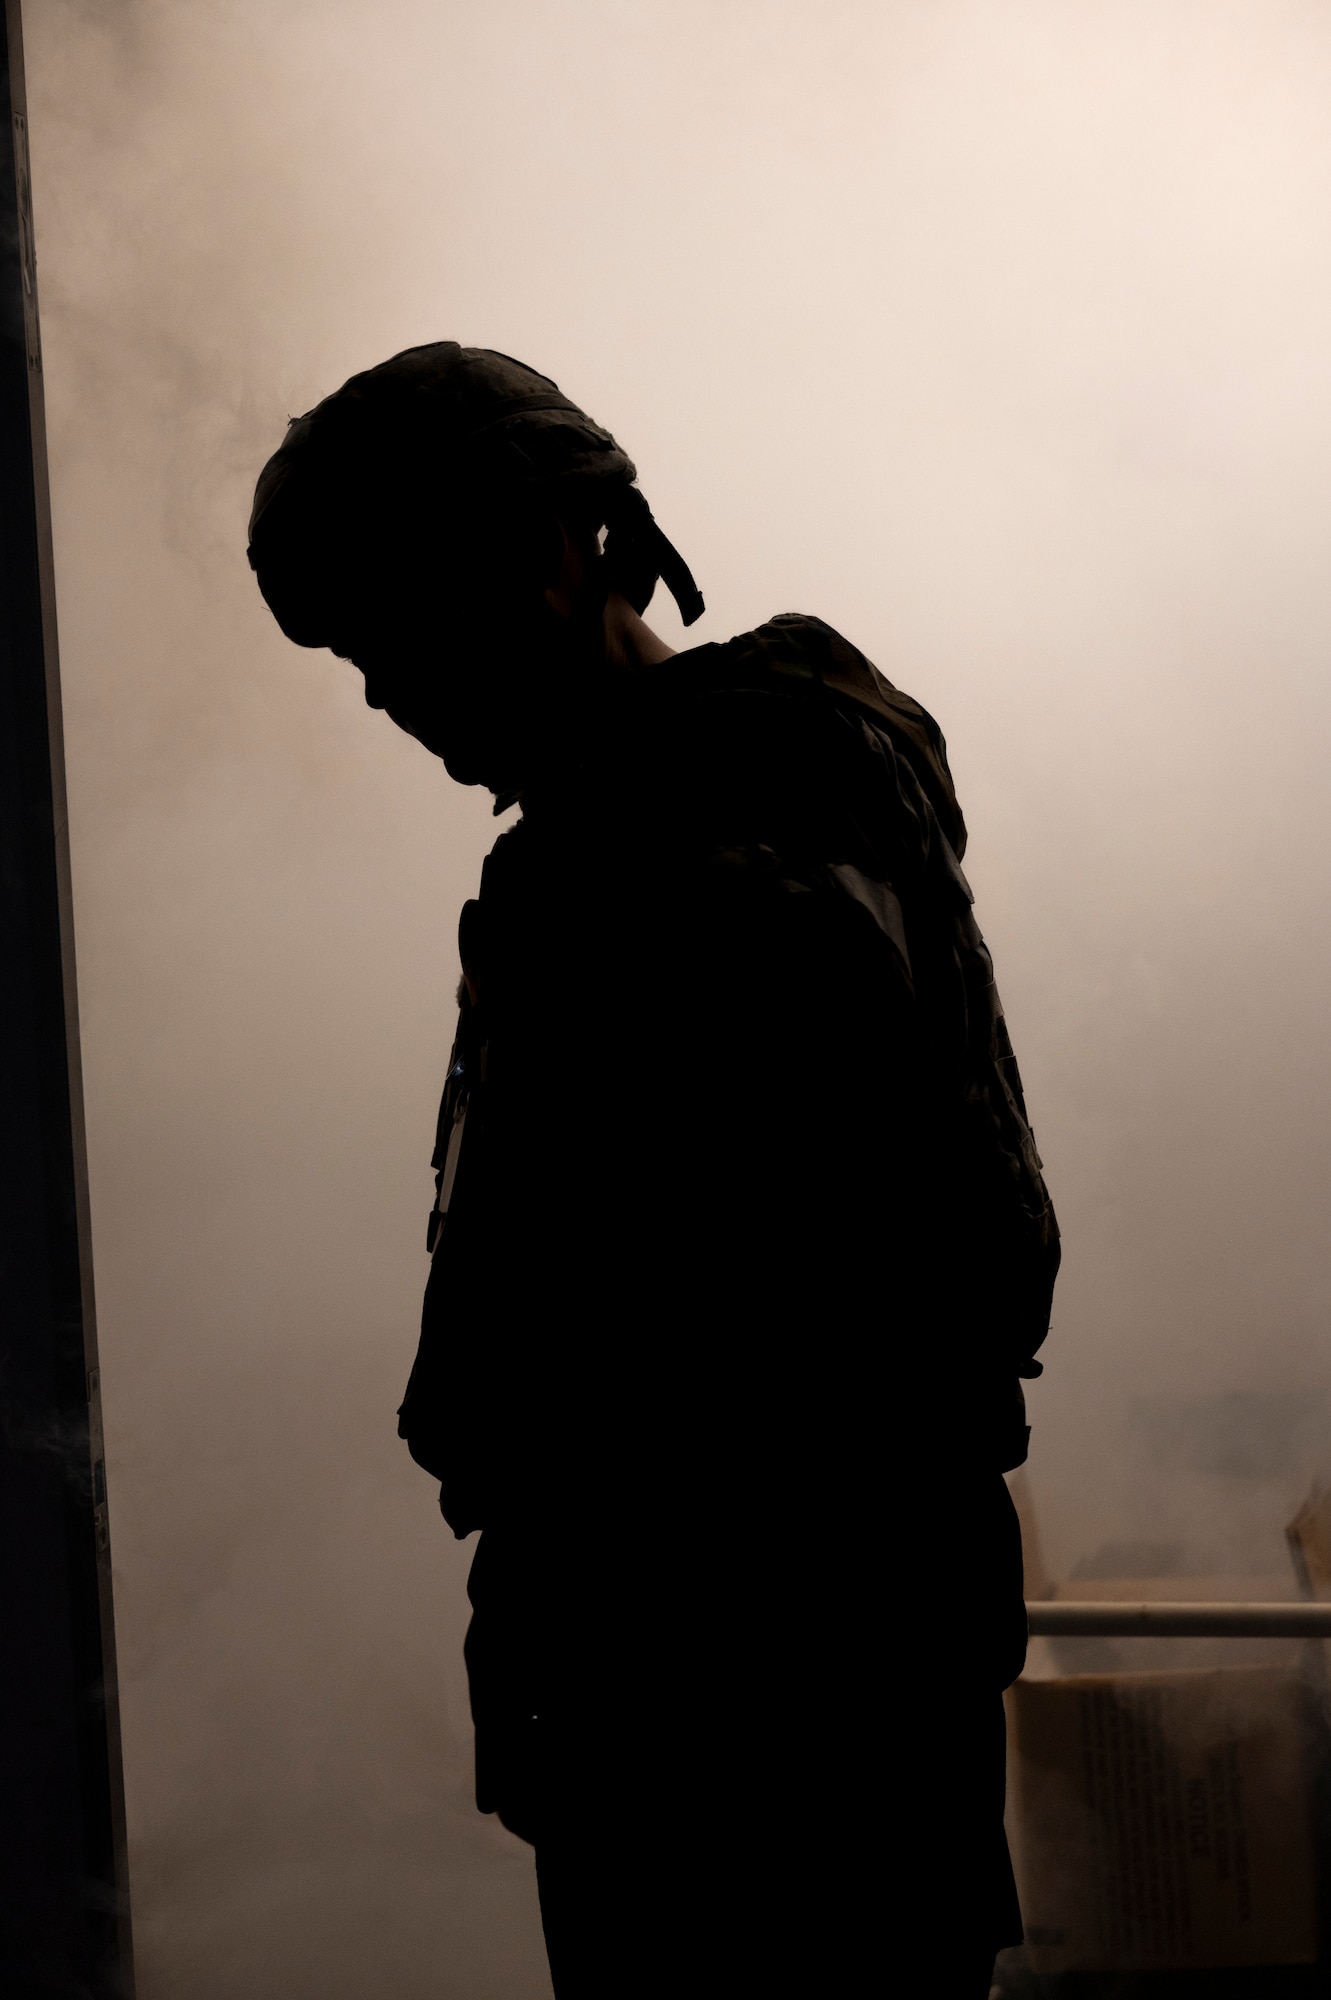 A Wing Inspection team (WIT) member with the 51st Civil Engineer Squadron prepares a room with smoke for a simulated fire during a training event at Osan Air Base, Republic of Korea, Aug. 16, 2022.